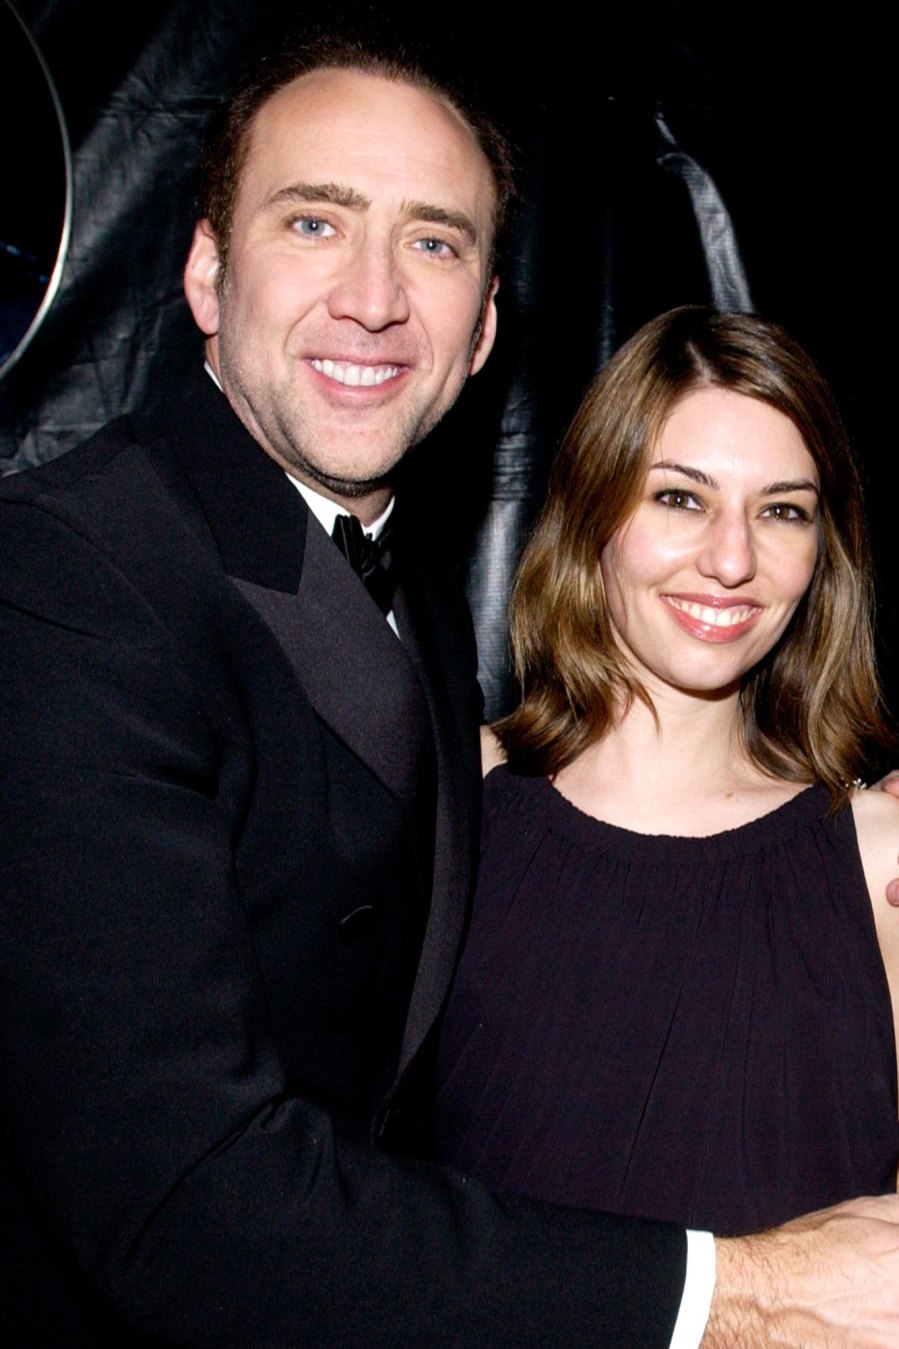 Unexpected Celebrity Family Connections and Relations Nicolas Cage and Sofia Coppola